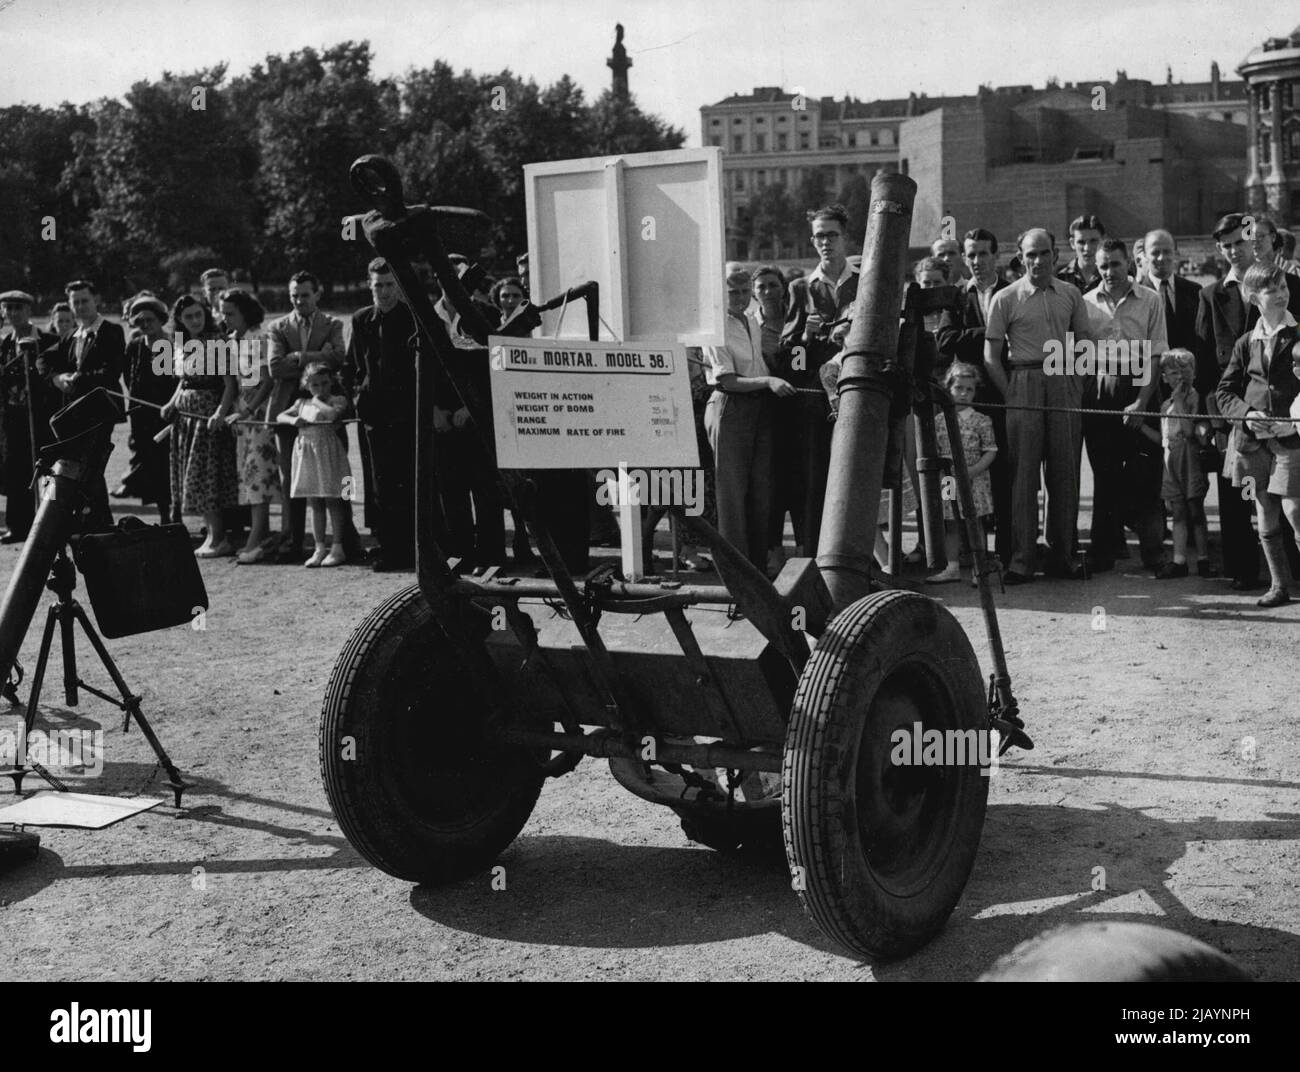 Russian Arms On View In London -- A 120 m.m. Mortar (Model 38), weight in action 578 lbs, weight of bomb 35 lbs, range 6,200 yds and Max rate of fire 12 round per minute. Russian equipment, captured from the Communists in Korea was on view on the Horse Guards Parade to-day for one week. It is the first time the equipment has been shown anywhere. July 02, 1951. Stock Photo